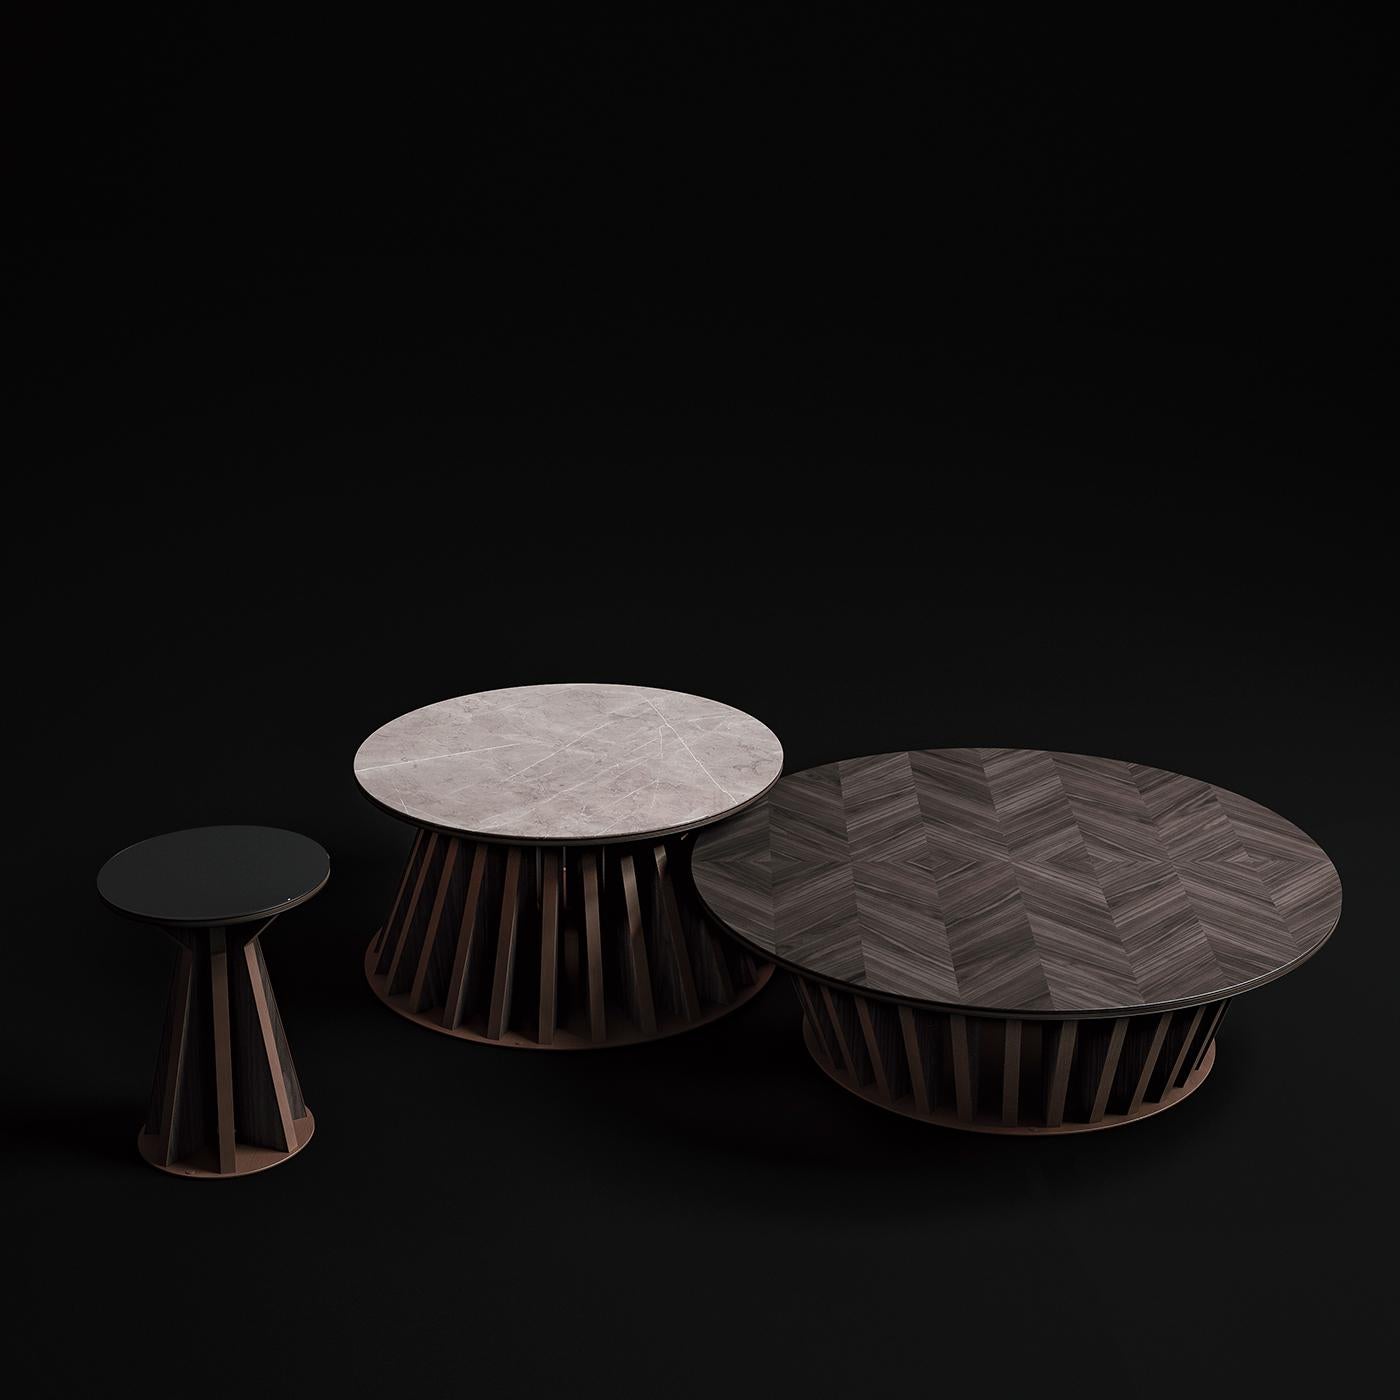 Characterized by the use of warm natural walnut wood and cool lacquered glass, the high side table brings Classic materials into the contemporary realm. With a round base and tabletop, the table plays with geometry through the use of diagonal spokes